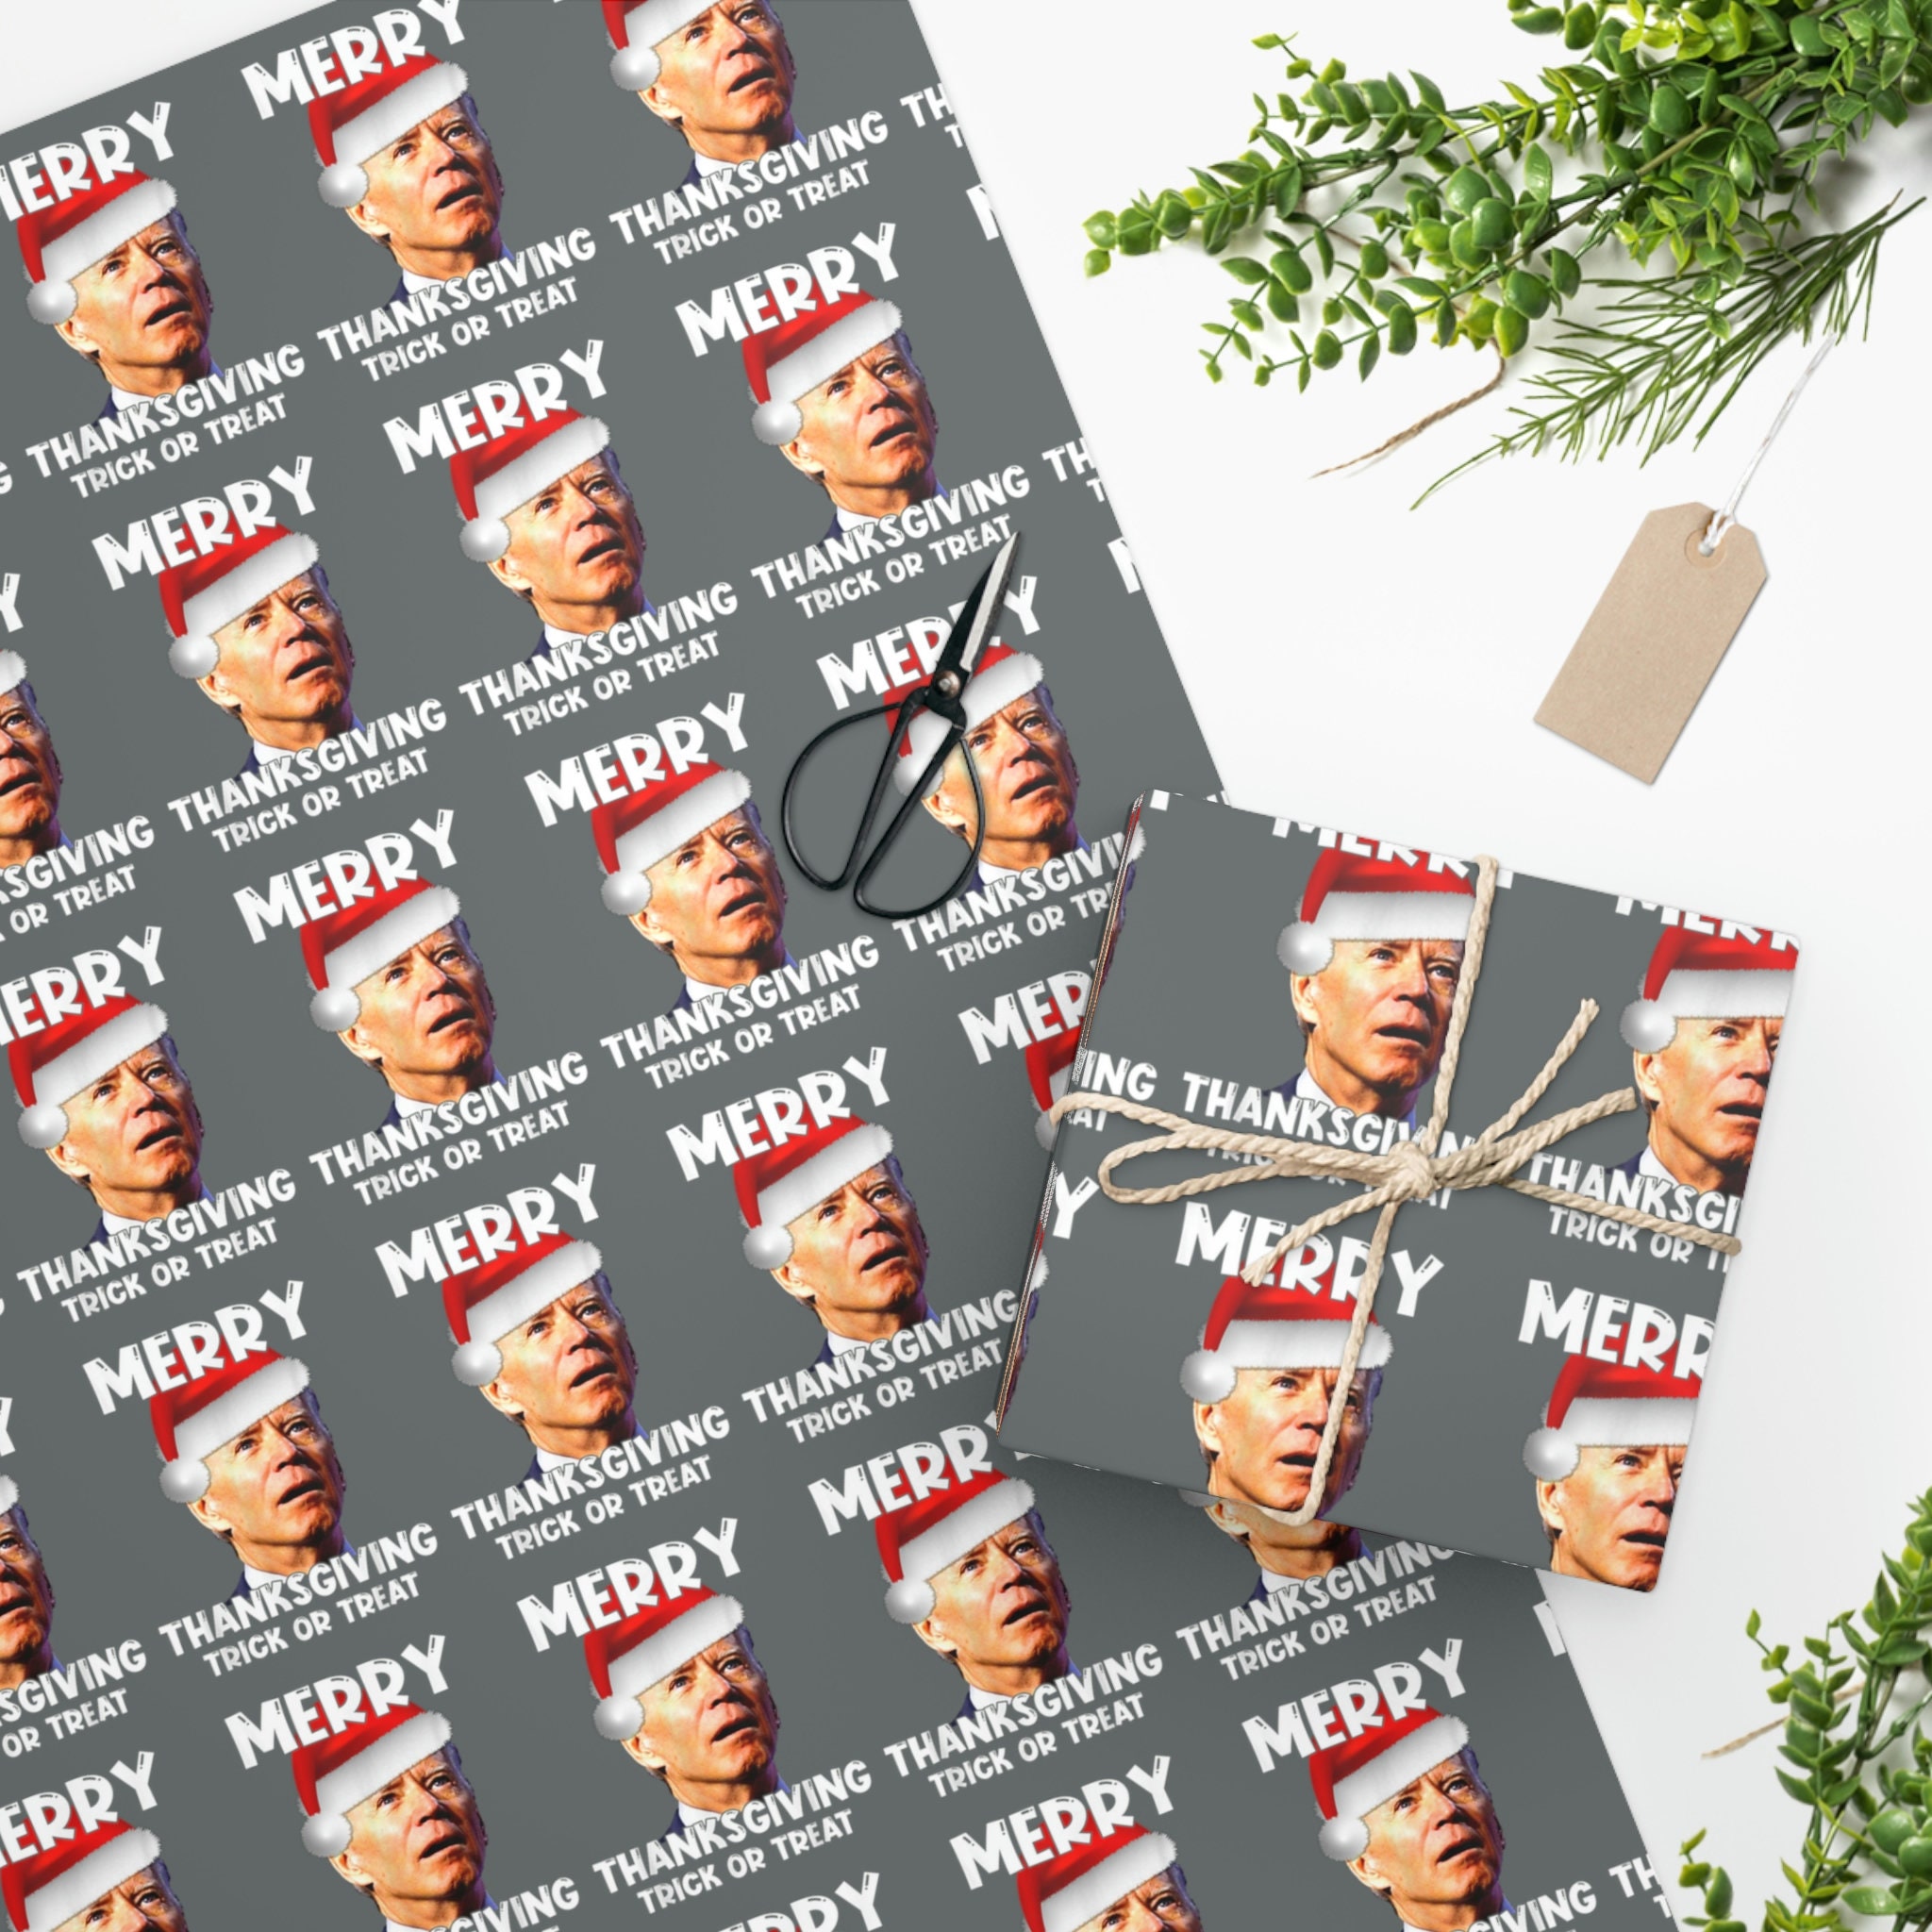  Funny Confused Biden Trump Christmas Wrapping Paper